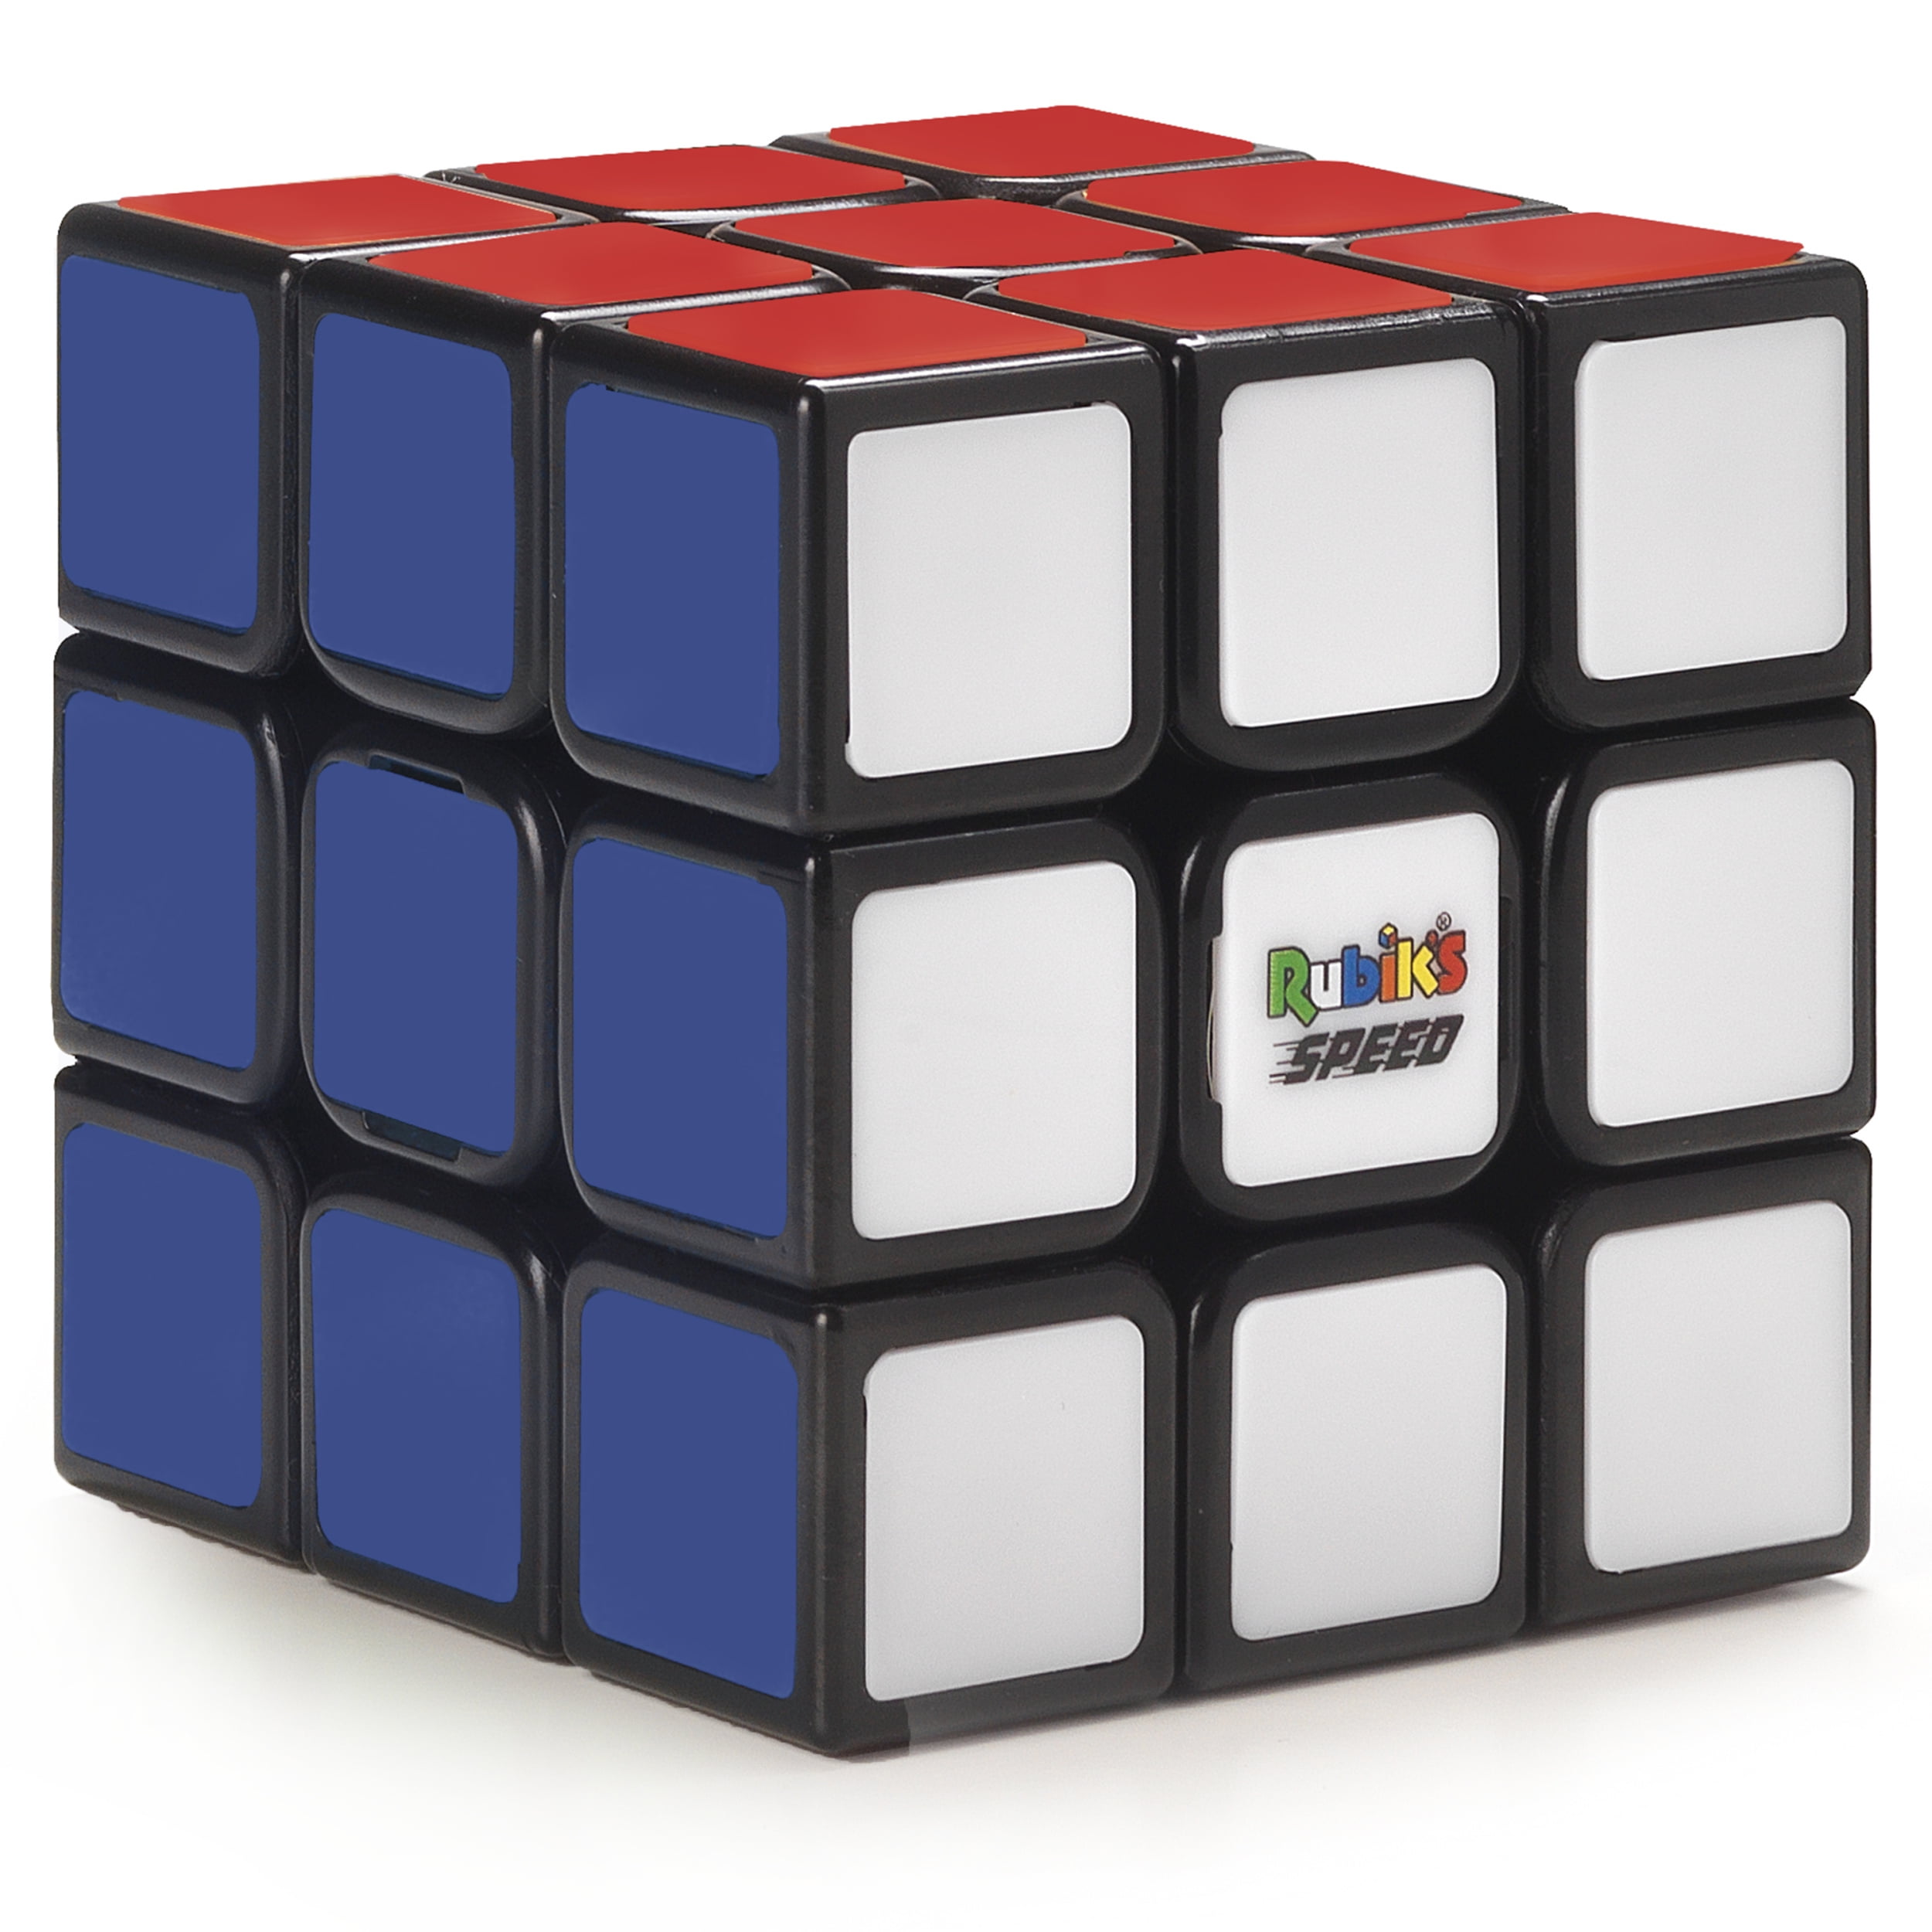 Rubiks Official Original Cube 3x3 Puzzle Game Brain Teaser Strategy Younger Kids 